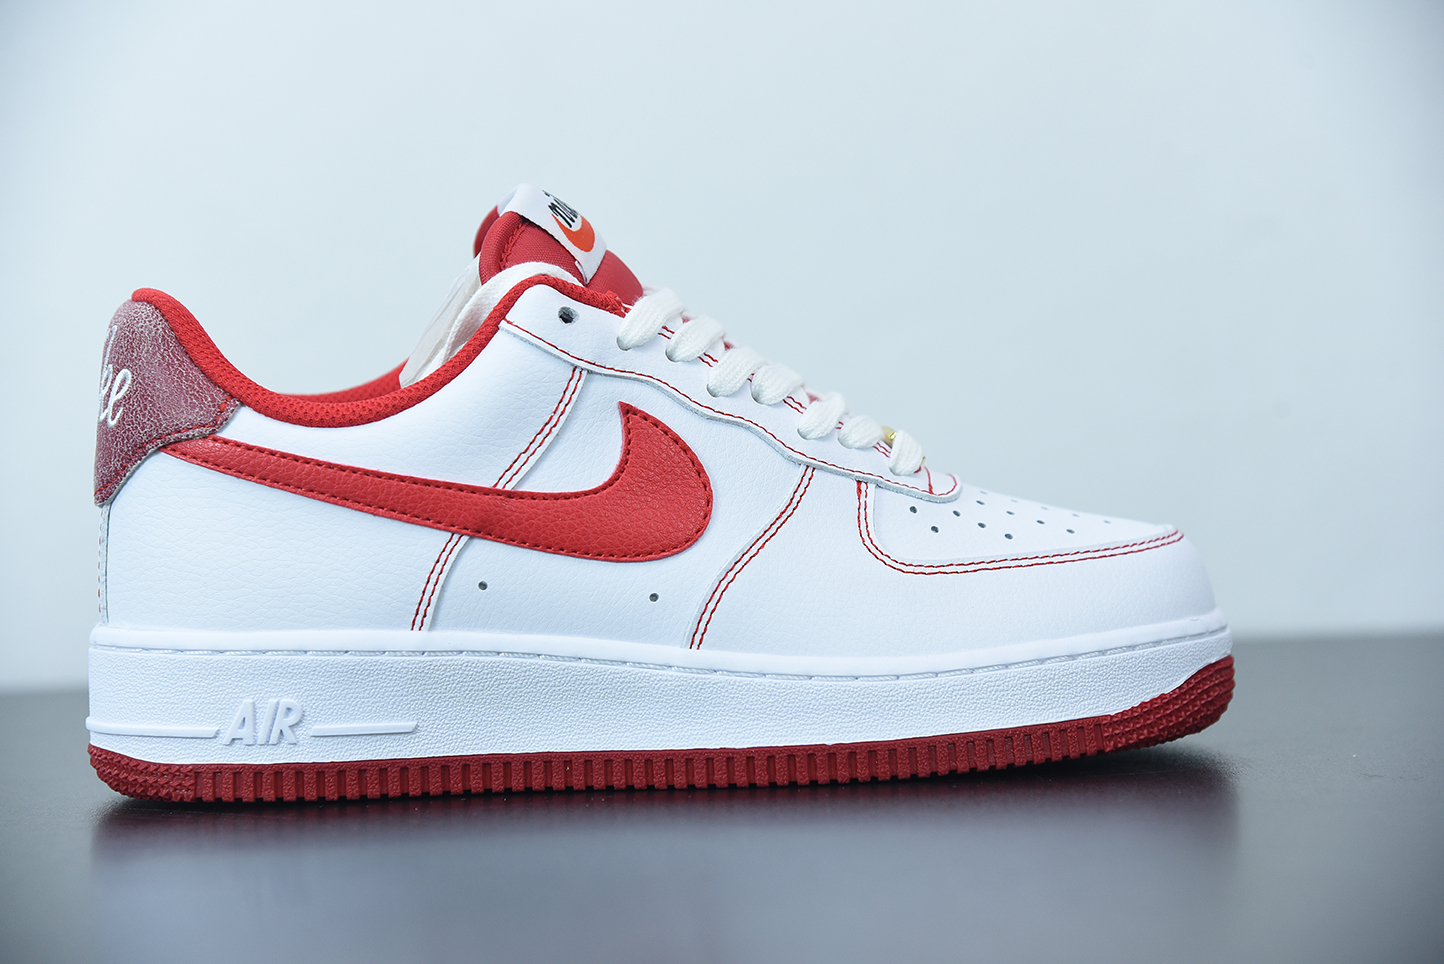 Nike Air Force 1 First Use Pack University Red & White Low Top Sneakers  Size 10